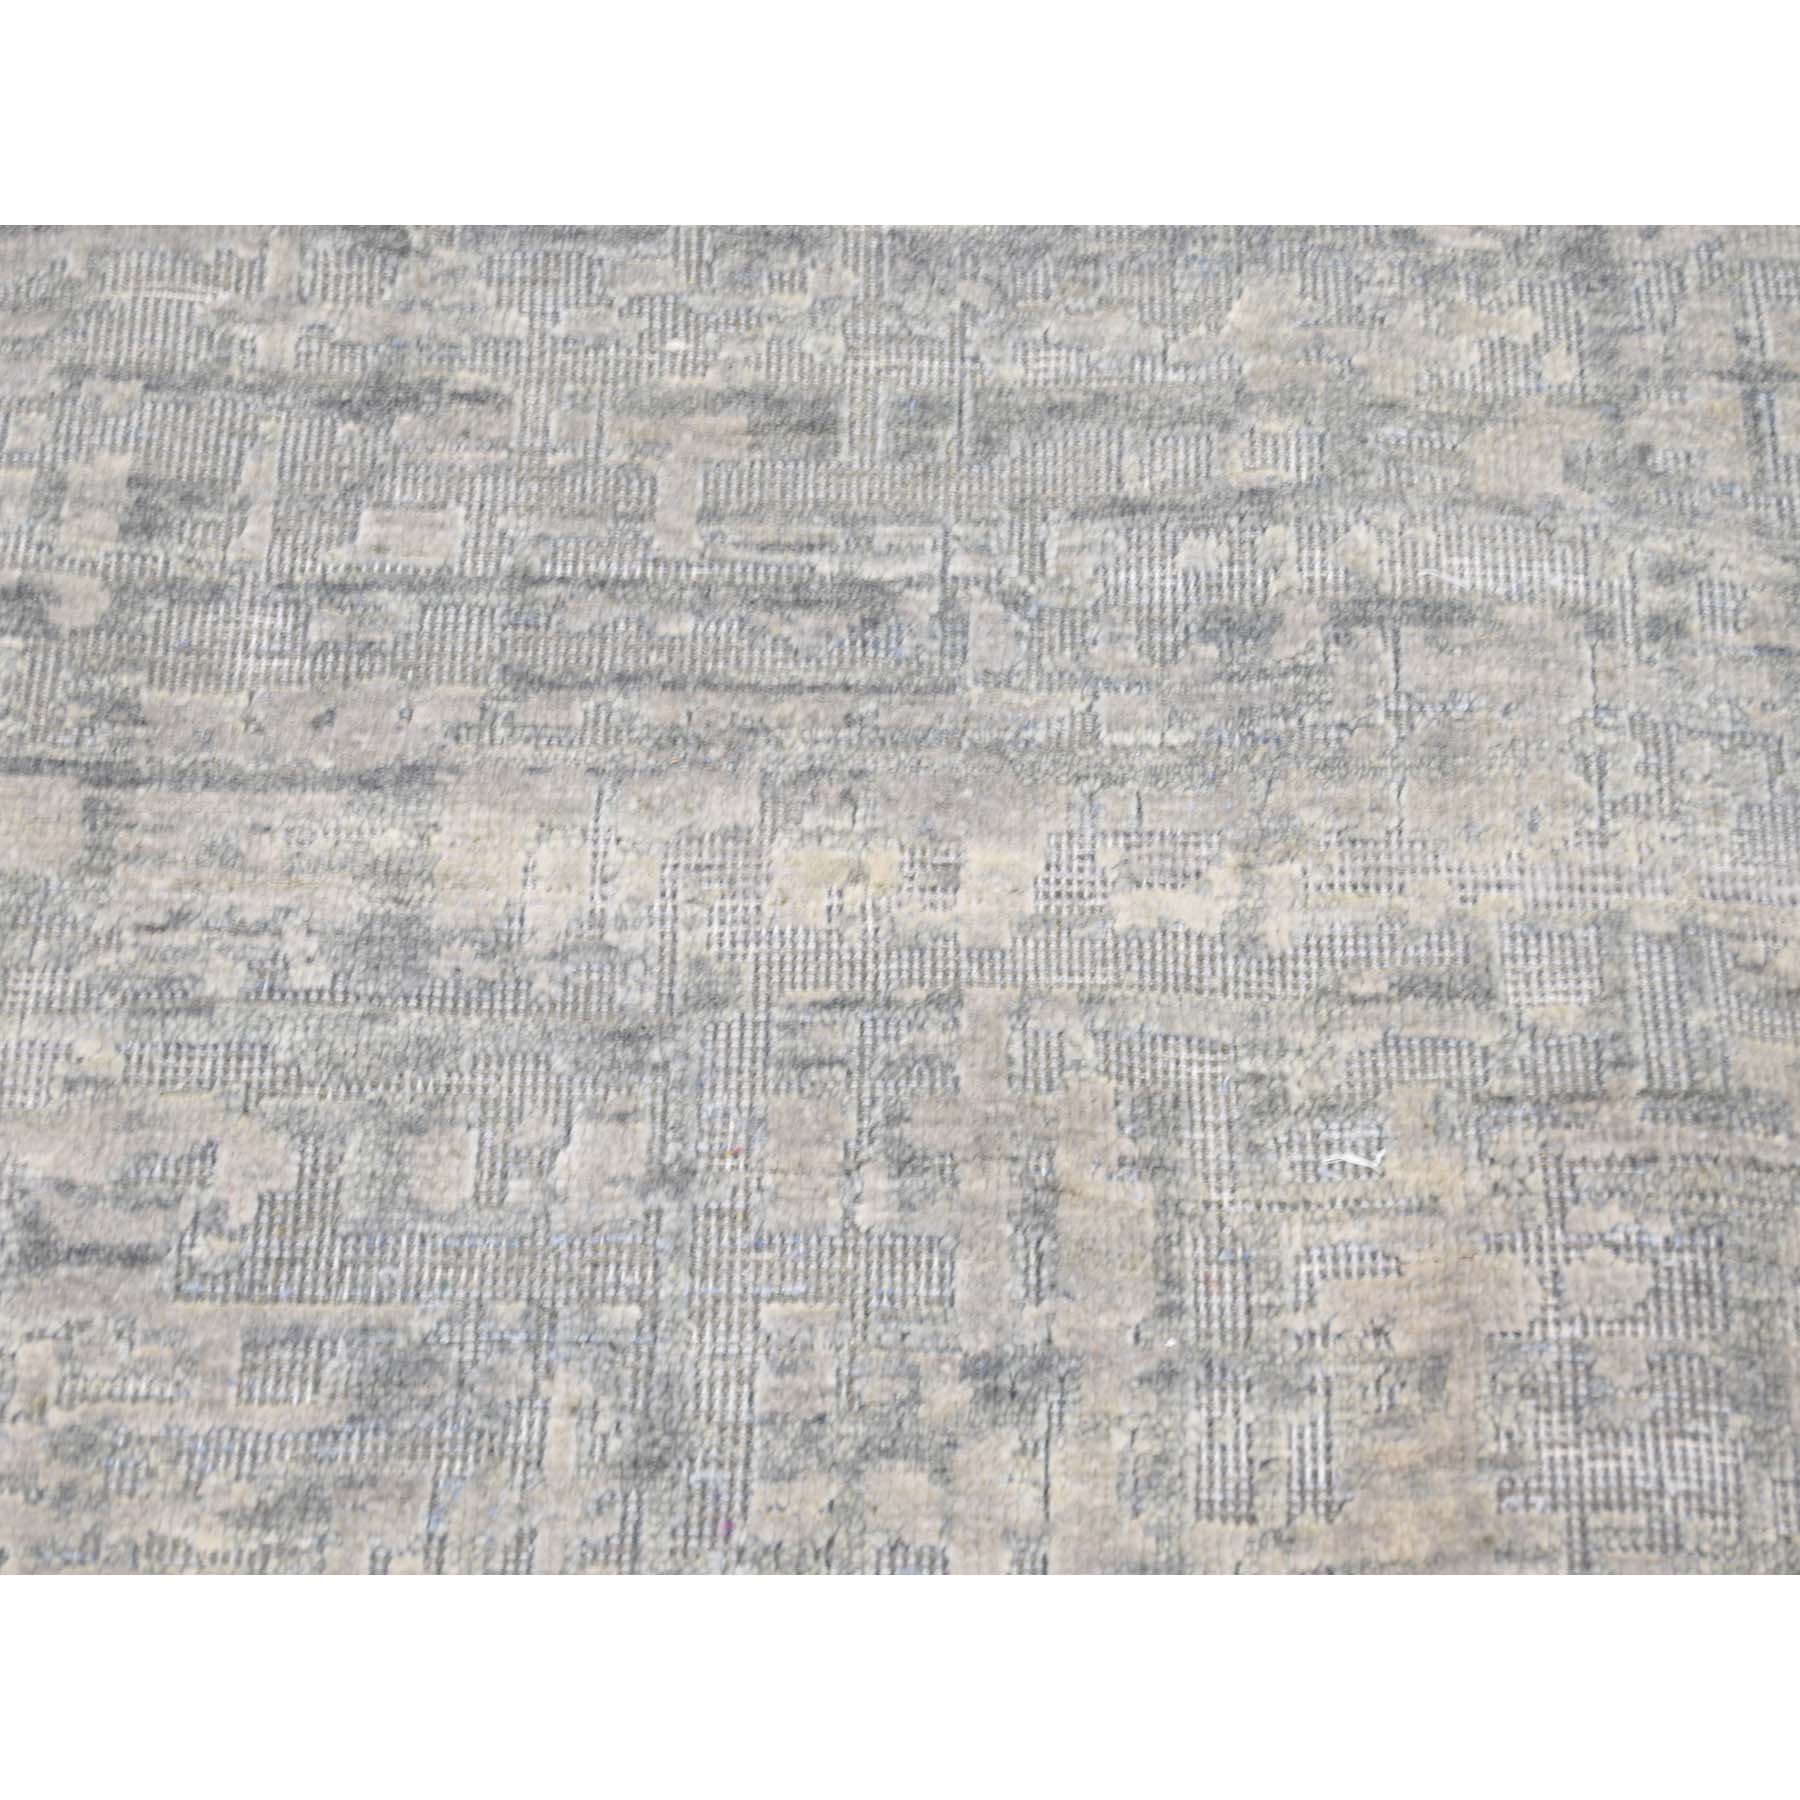 8-x10-1  THE MATRIX Pure Silk with Textured Wool Tone on Tone Hand-Knotted Rug 